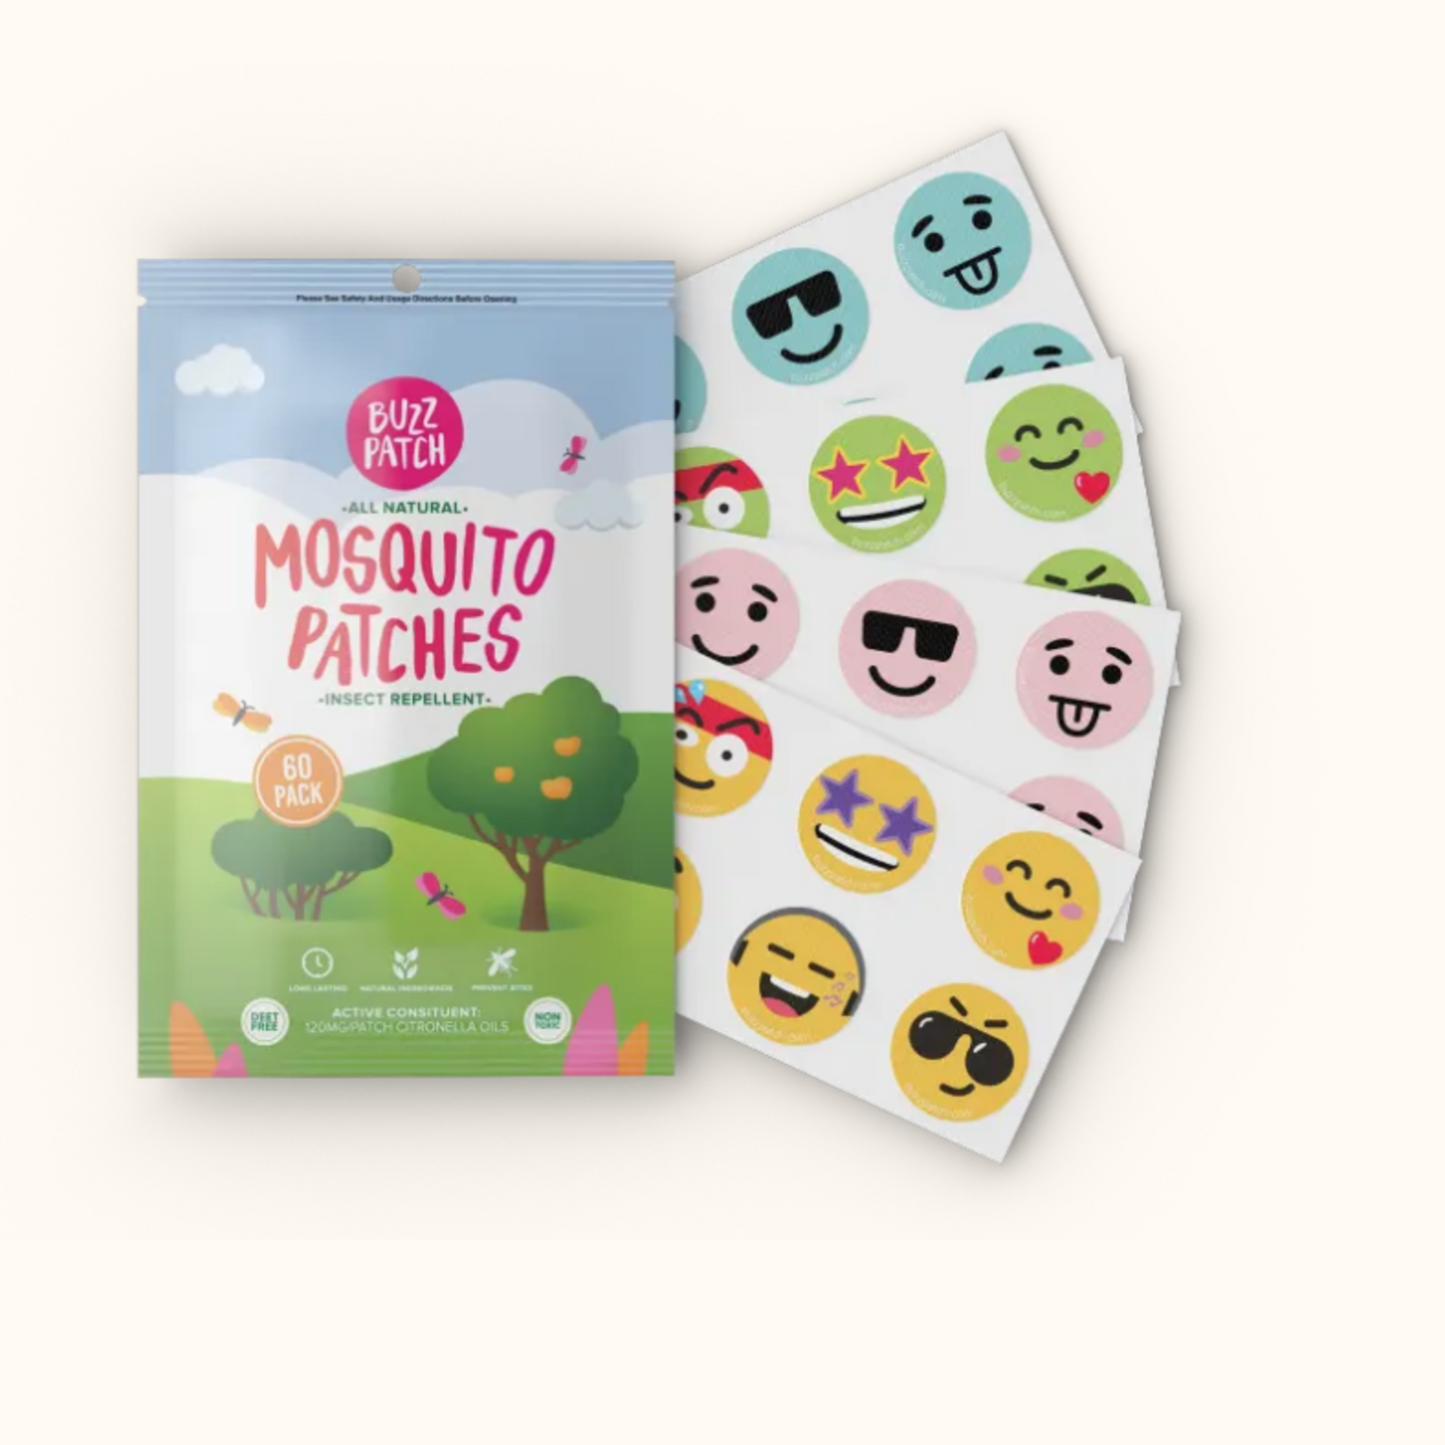 Mosquito Patch 60 pk